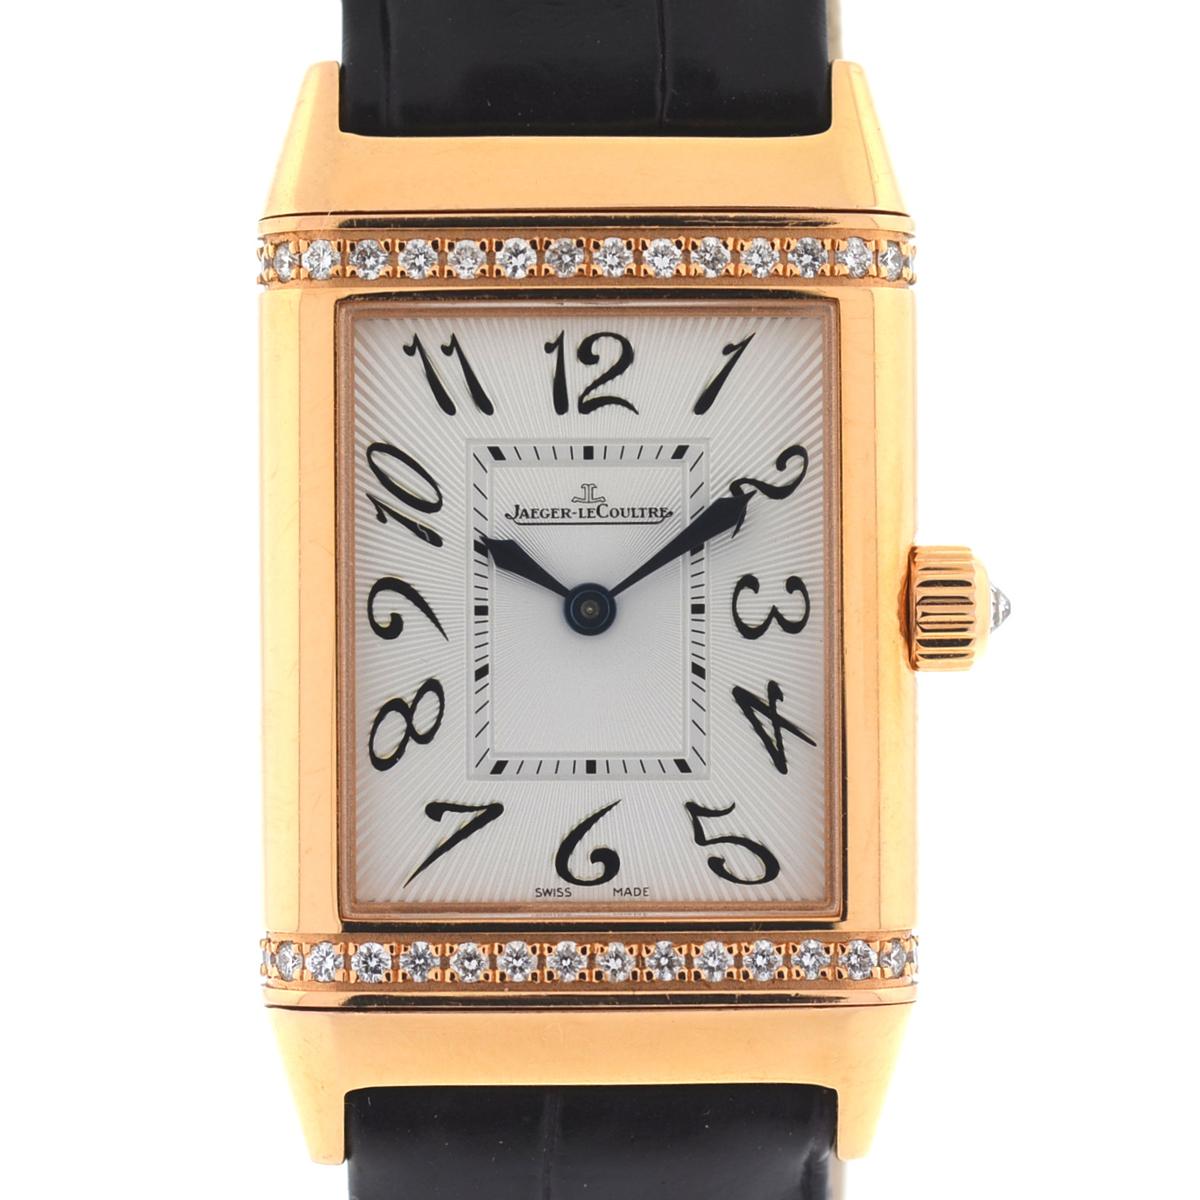 Company - Jaeger Lecoultre
Style - Luxury Dress Watch
Model - Reverso Duetto 
Reference Number - 256.2.75
Case Metal - 18k Rose Gold 
Case Measurement - 25 mm
Bracelet - Leather 
Dial - White / Black
Bezel - 18k Rose Gold w/ Diamonds
Crystal -